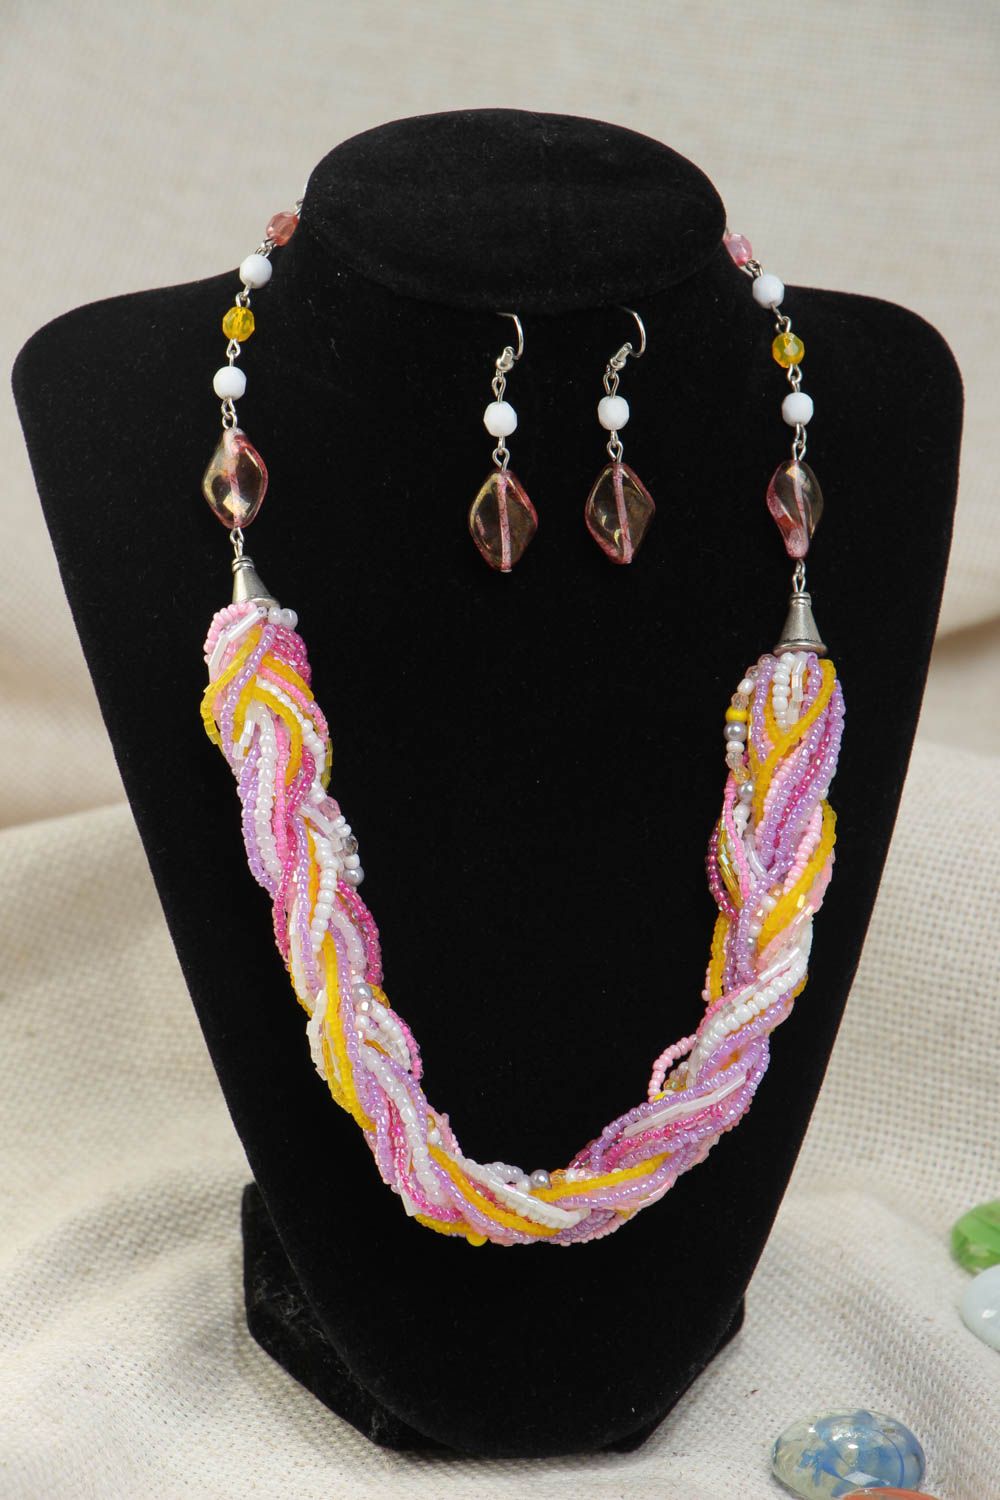 Handmade colorful beaded jewelry set 2 accessories earrings and necklace photo 1